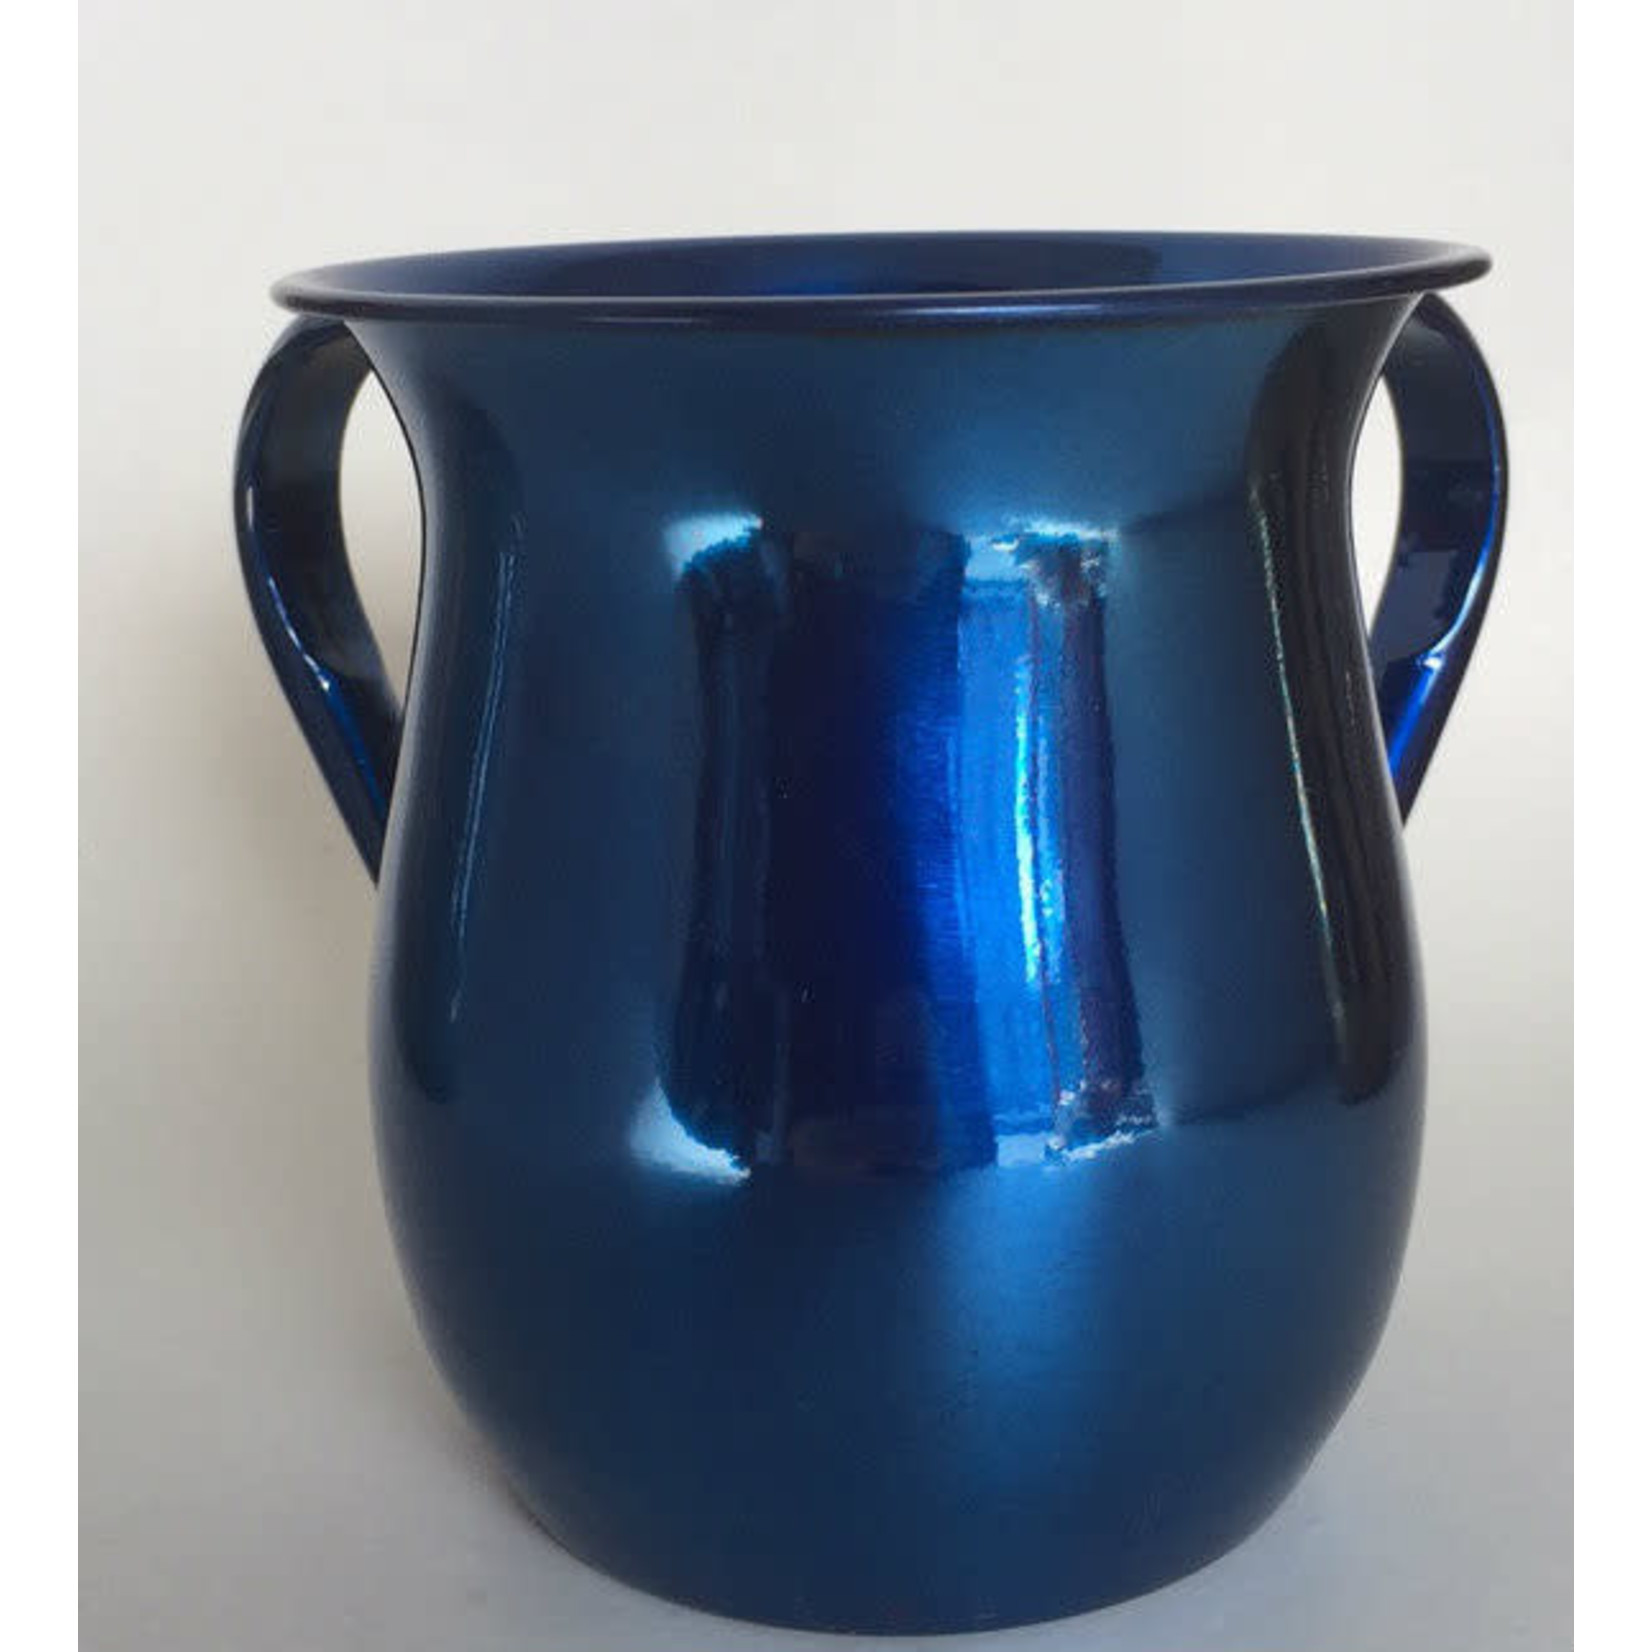 Washing Cup, Anodized Stainless Steel, Blue